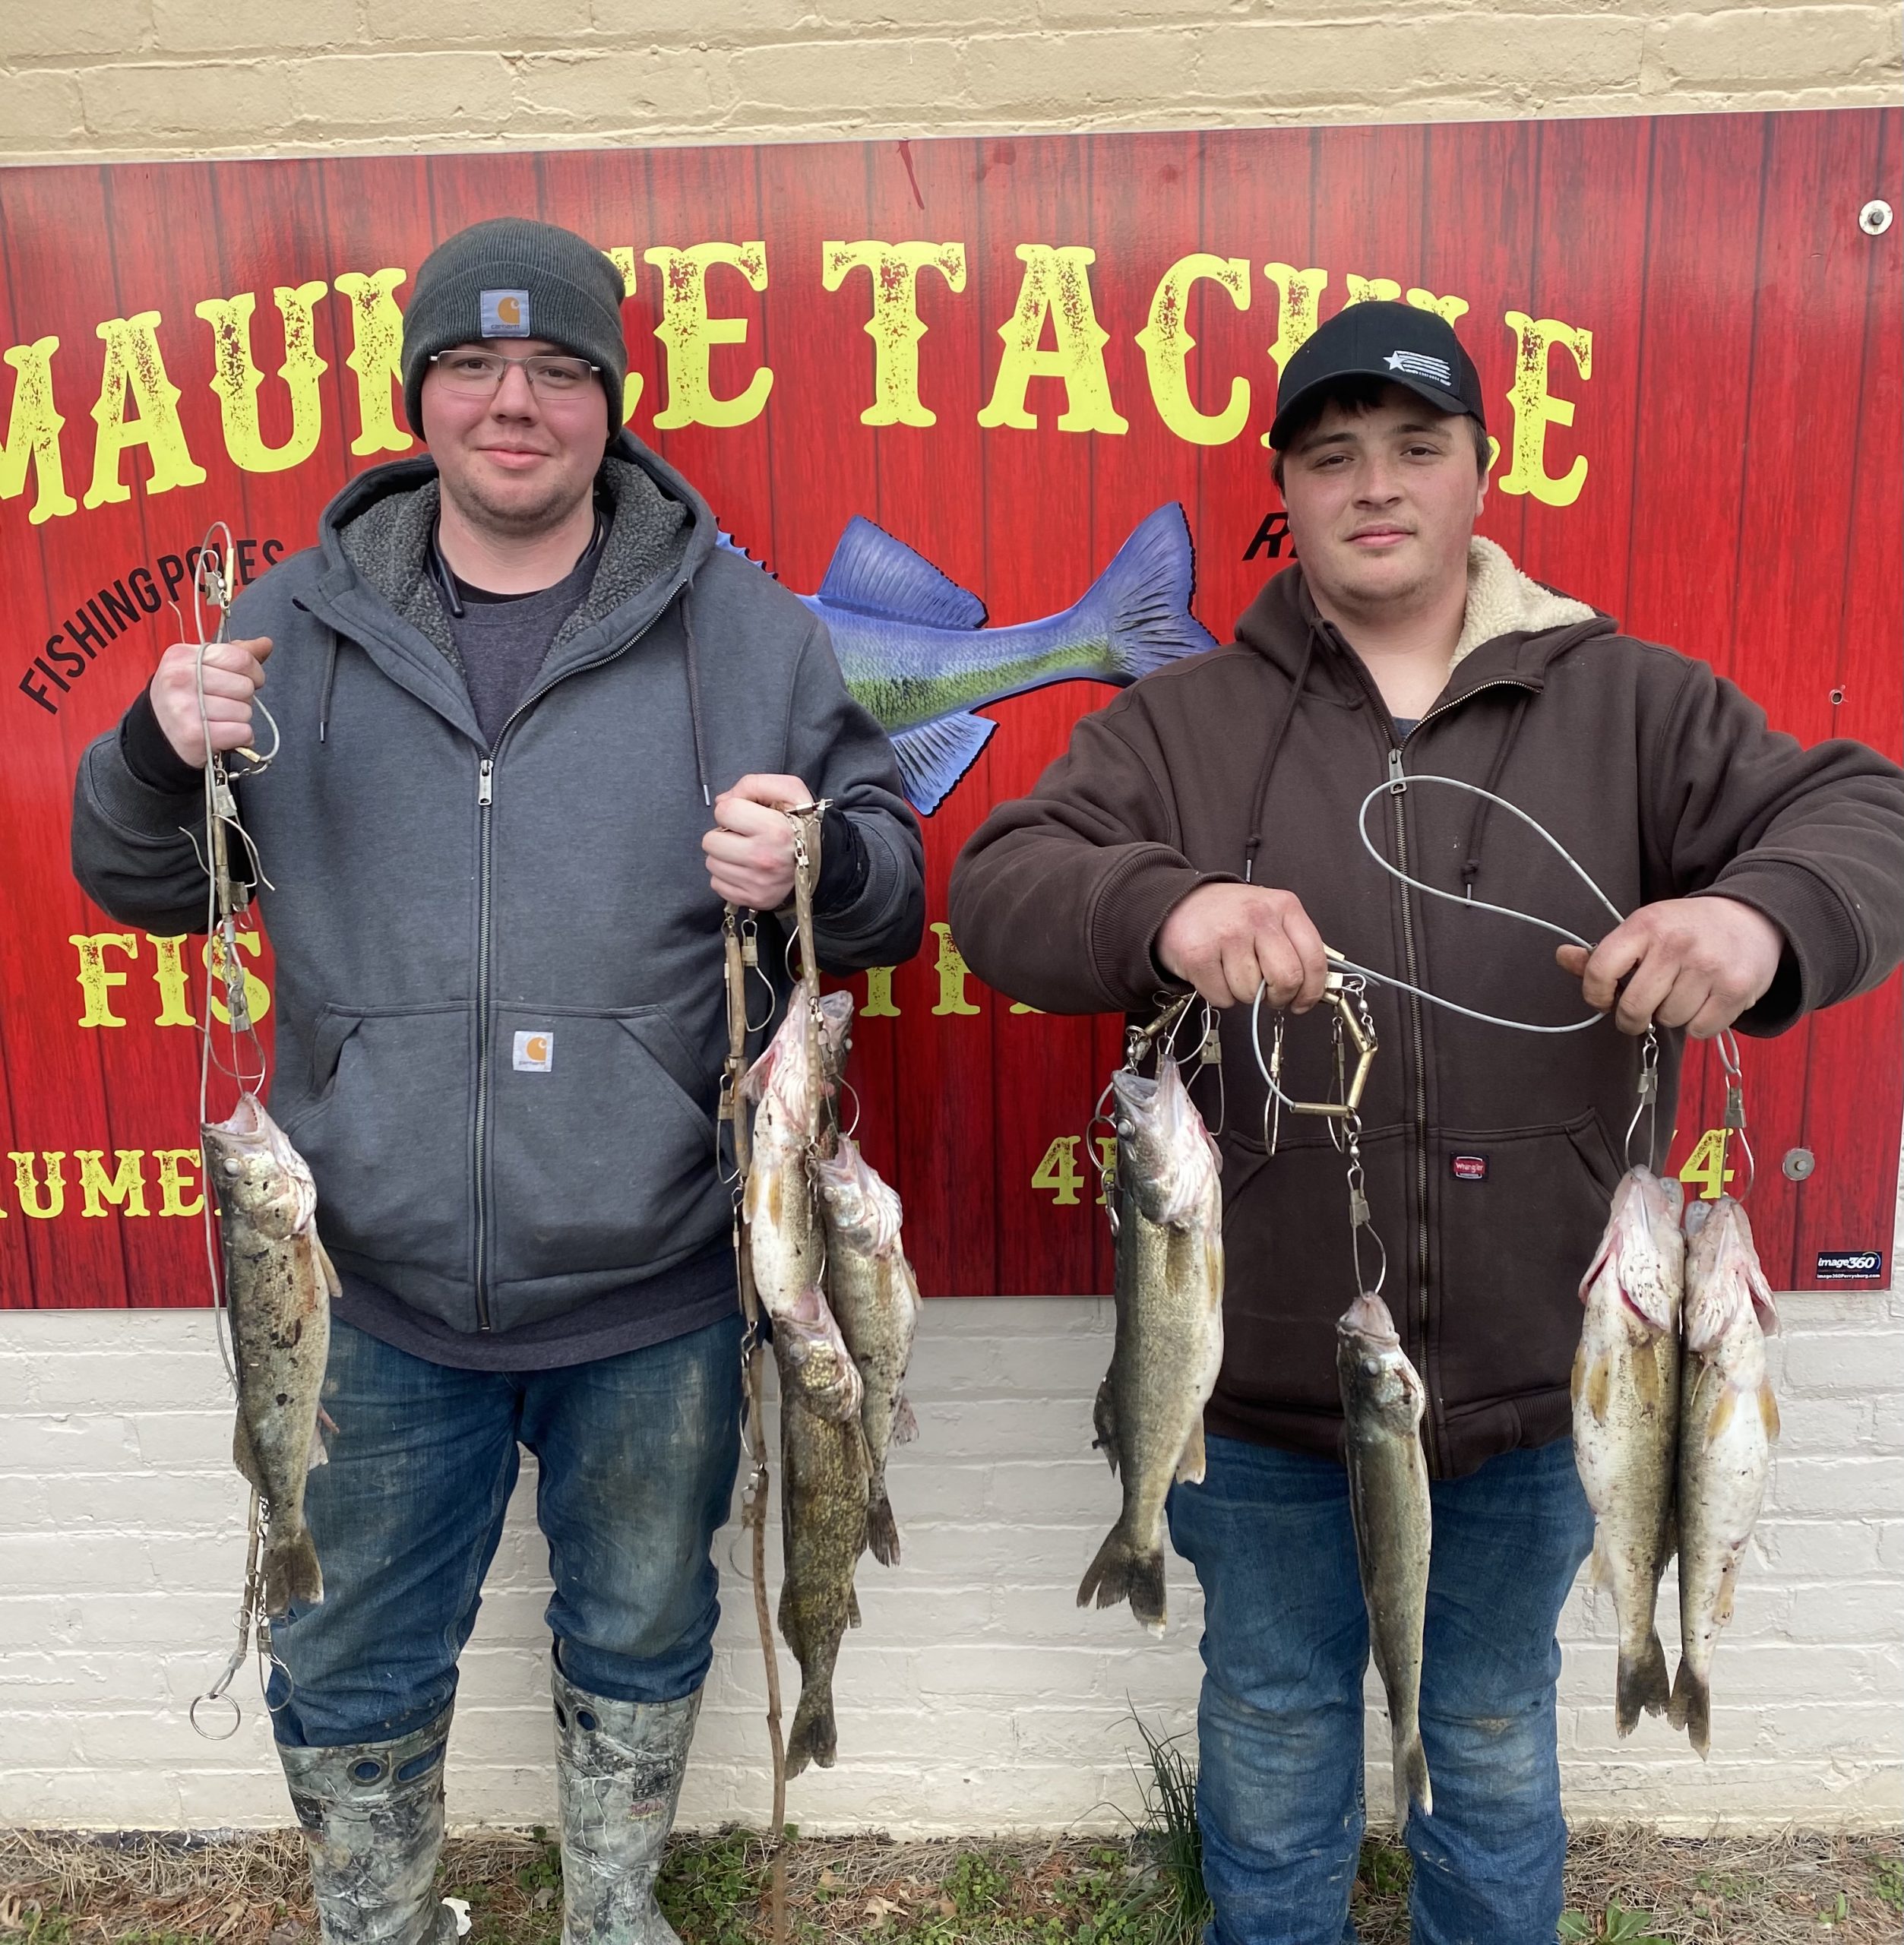 maumee river report- 3 april 2022